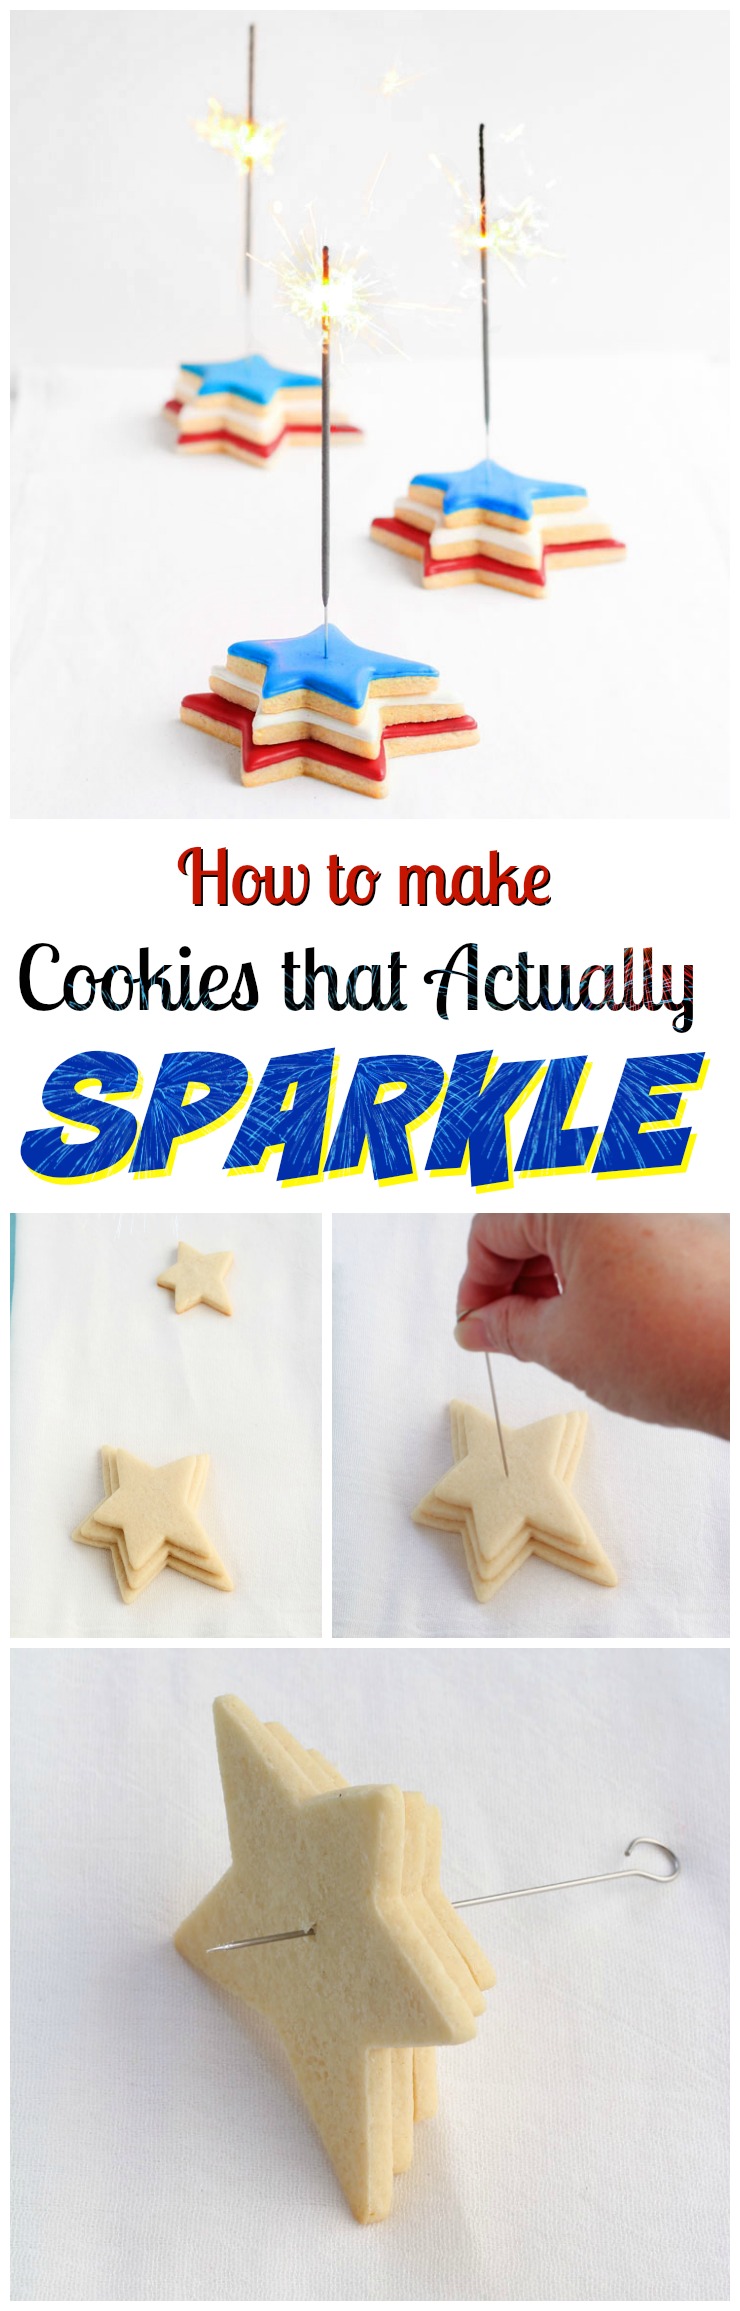 How to Make Cookies that Actually Sparkle via www.thebearfootbaker.com